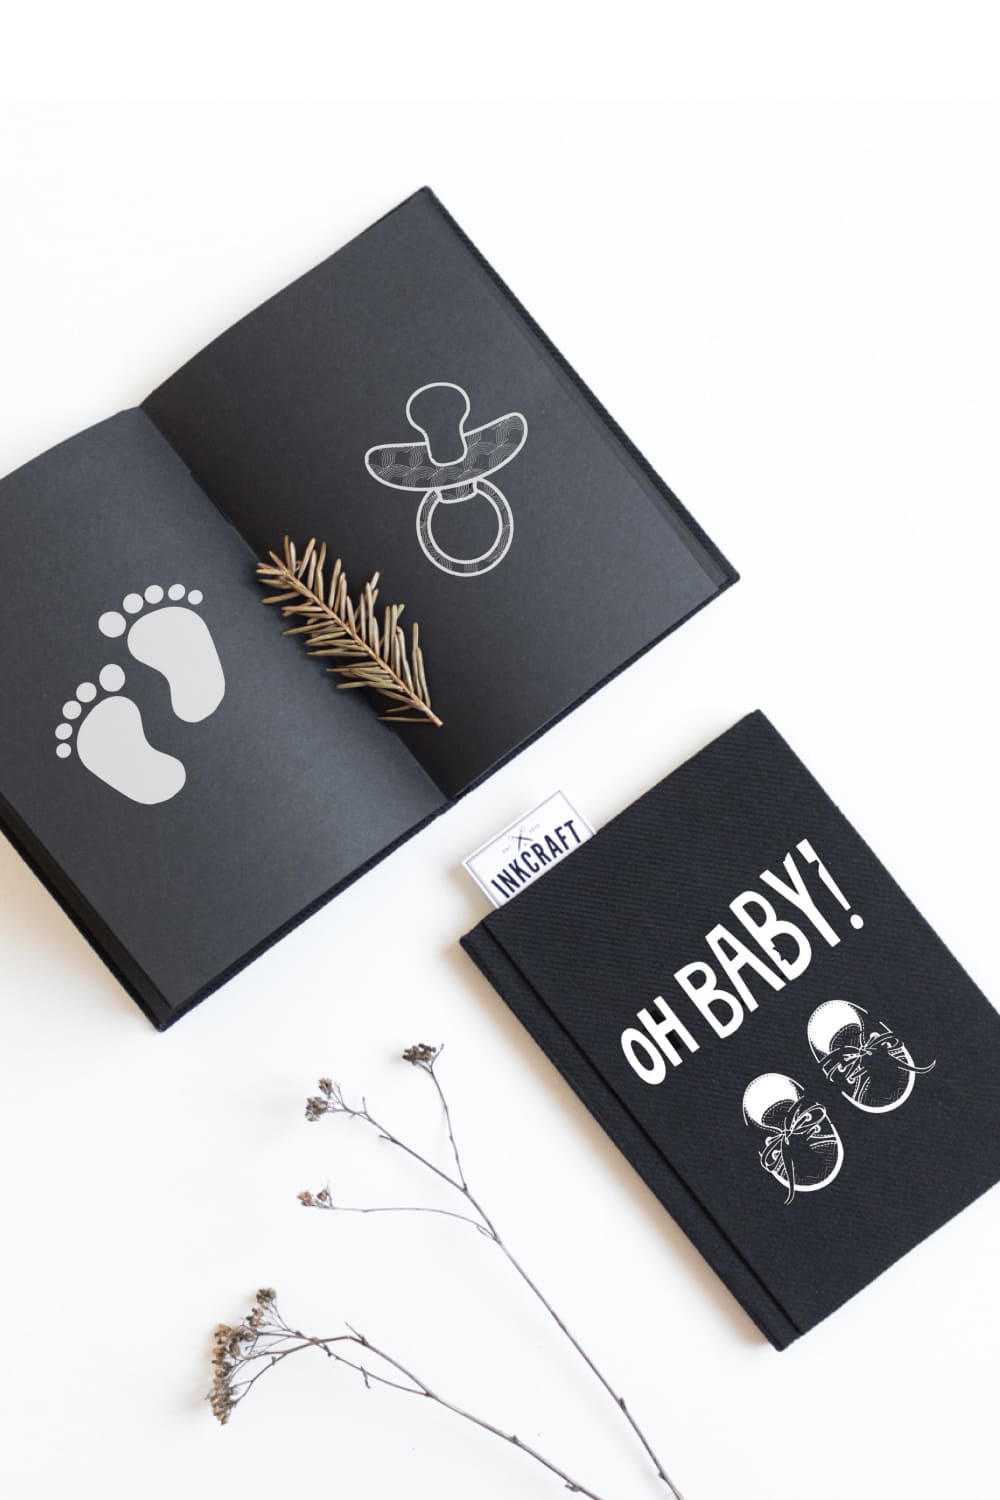 These graphics are excellent for handmade craft items, invitations, announcements, scrapbooking, web design, and graphic design.